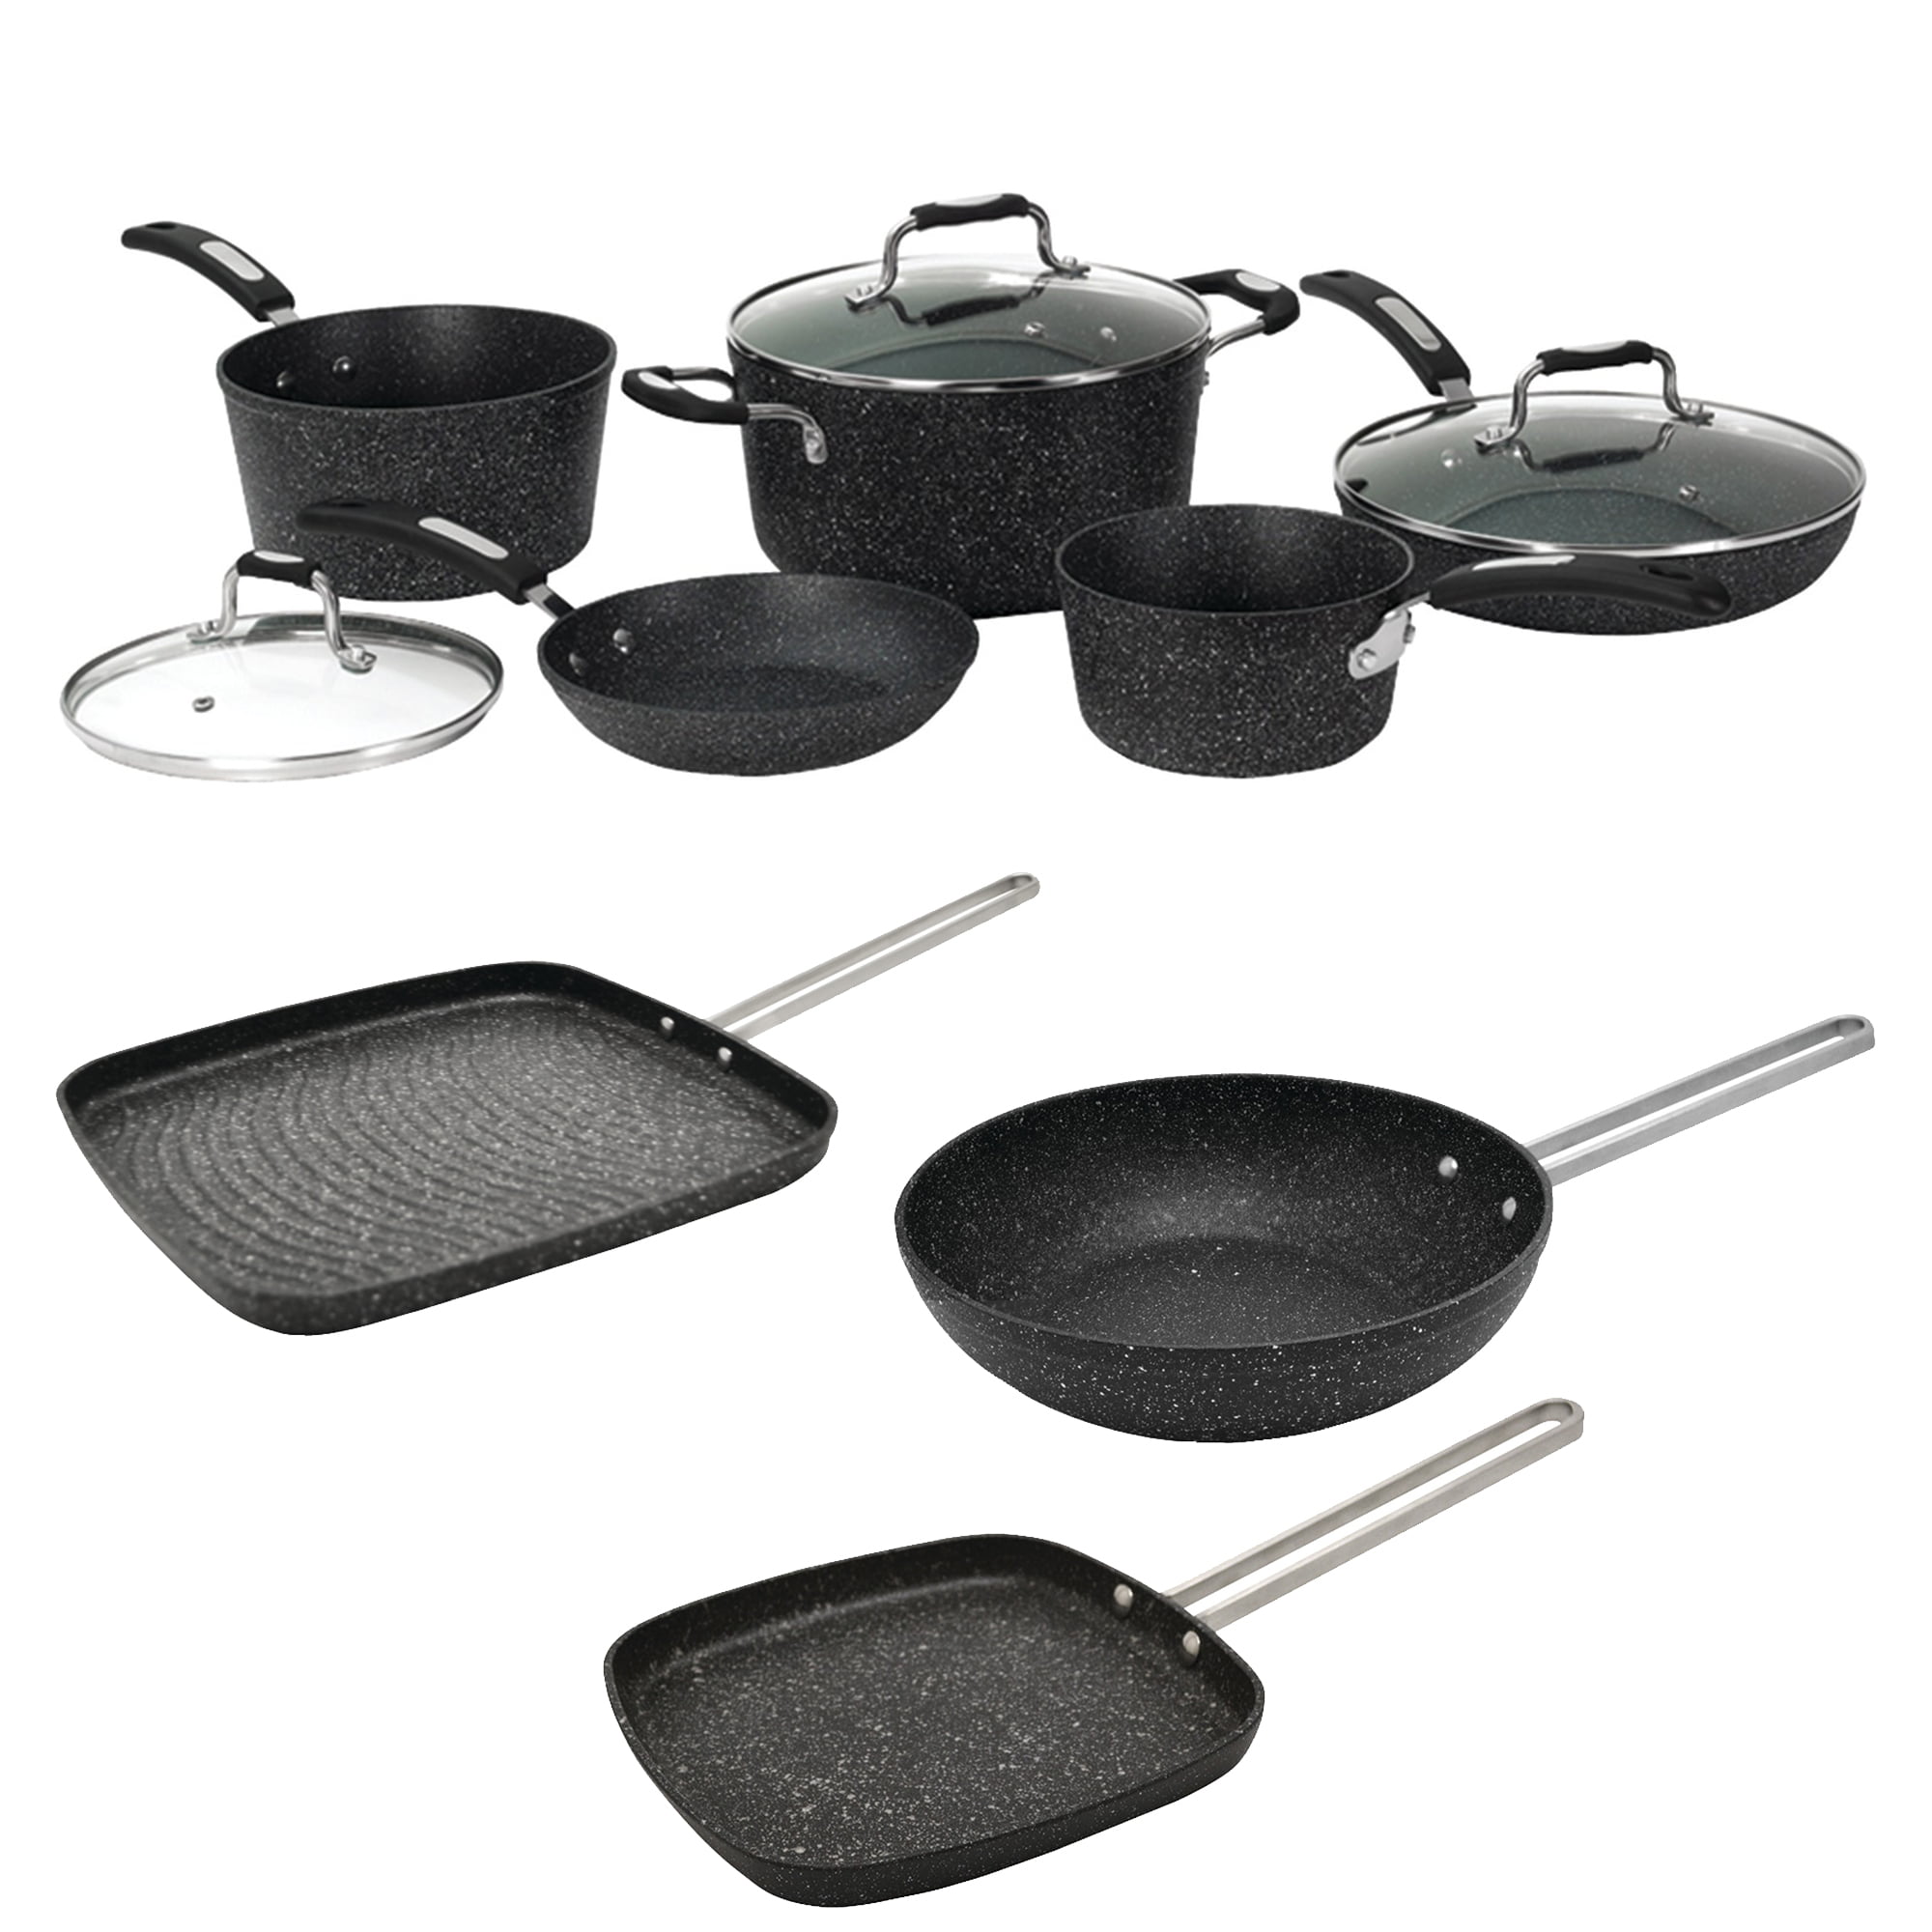 The Rock By Starfrit  The Rock By Starfrit 8-Piece Cookware Set With Ceramic Co 